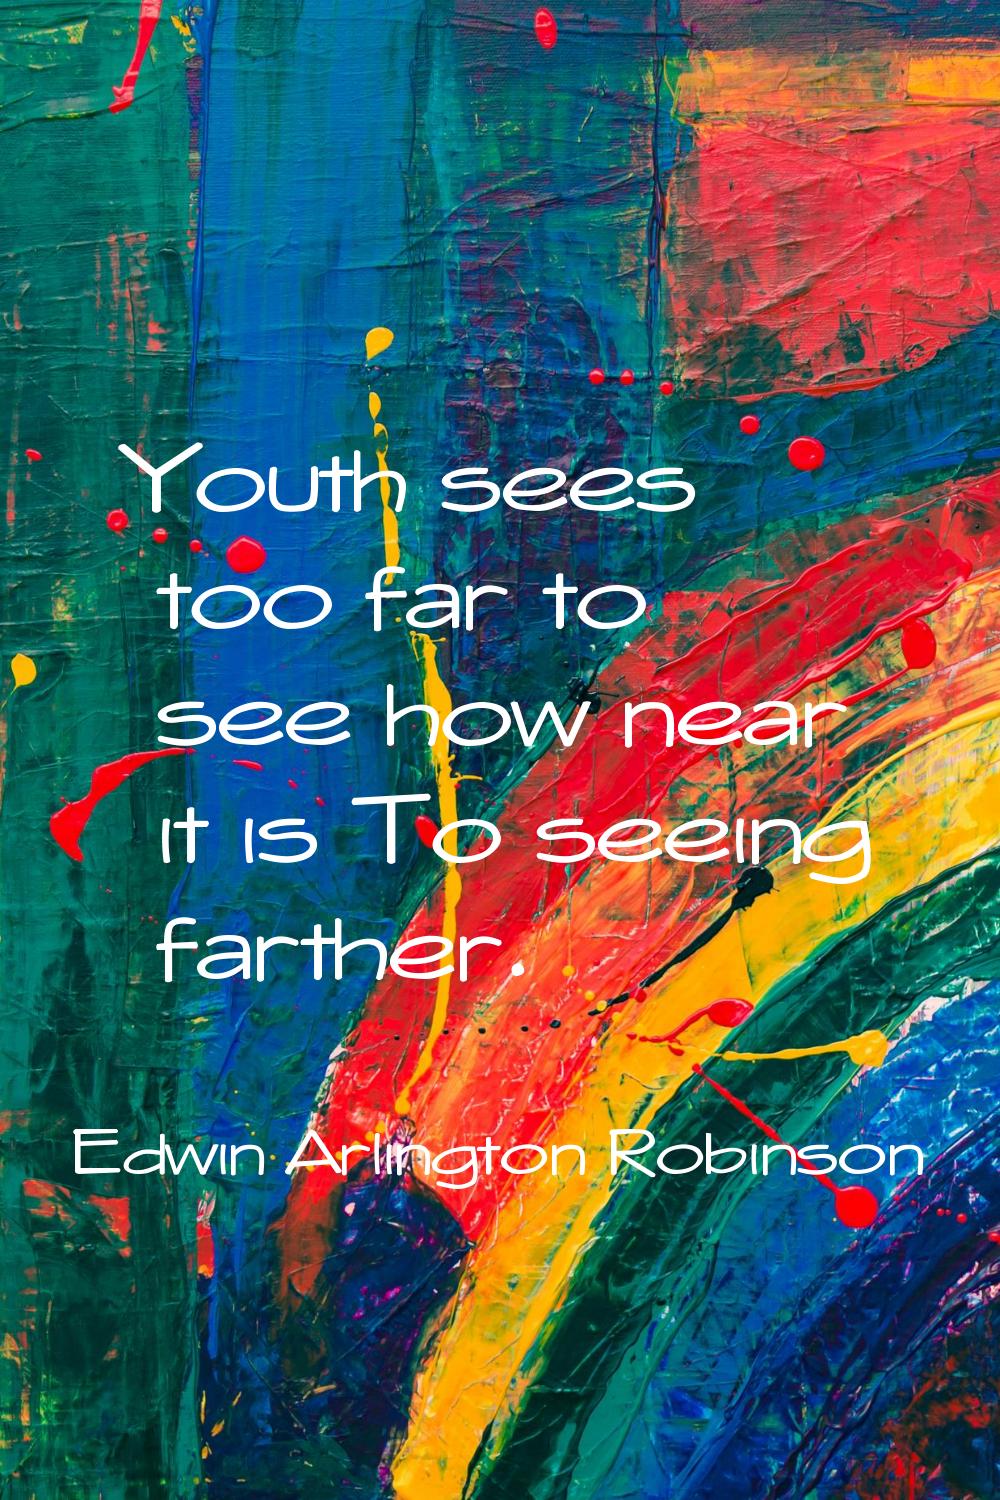 Youth sees too far to see how near it is To seeing farther.